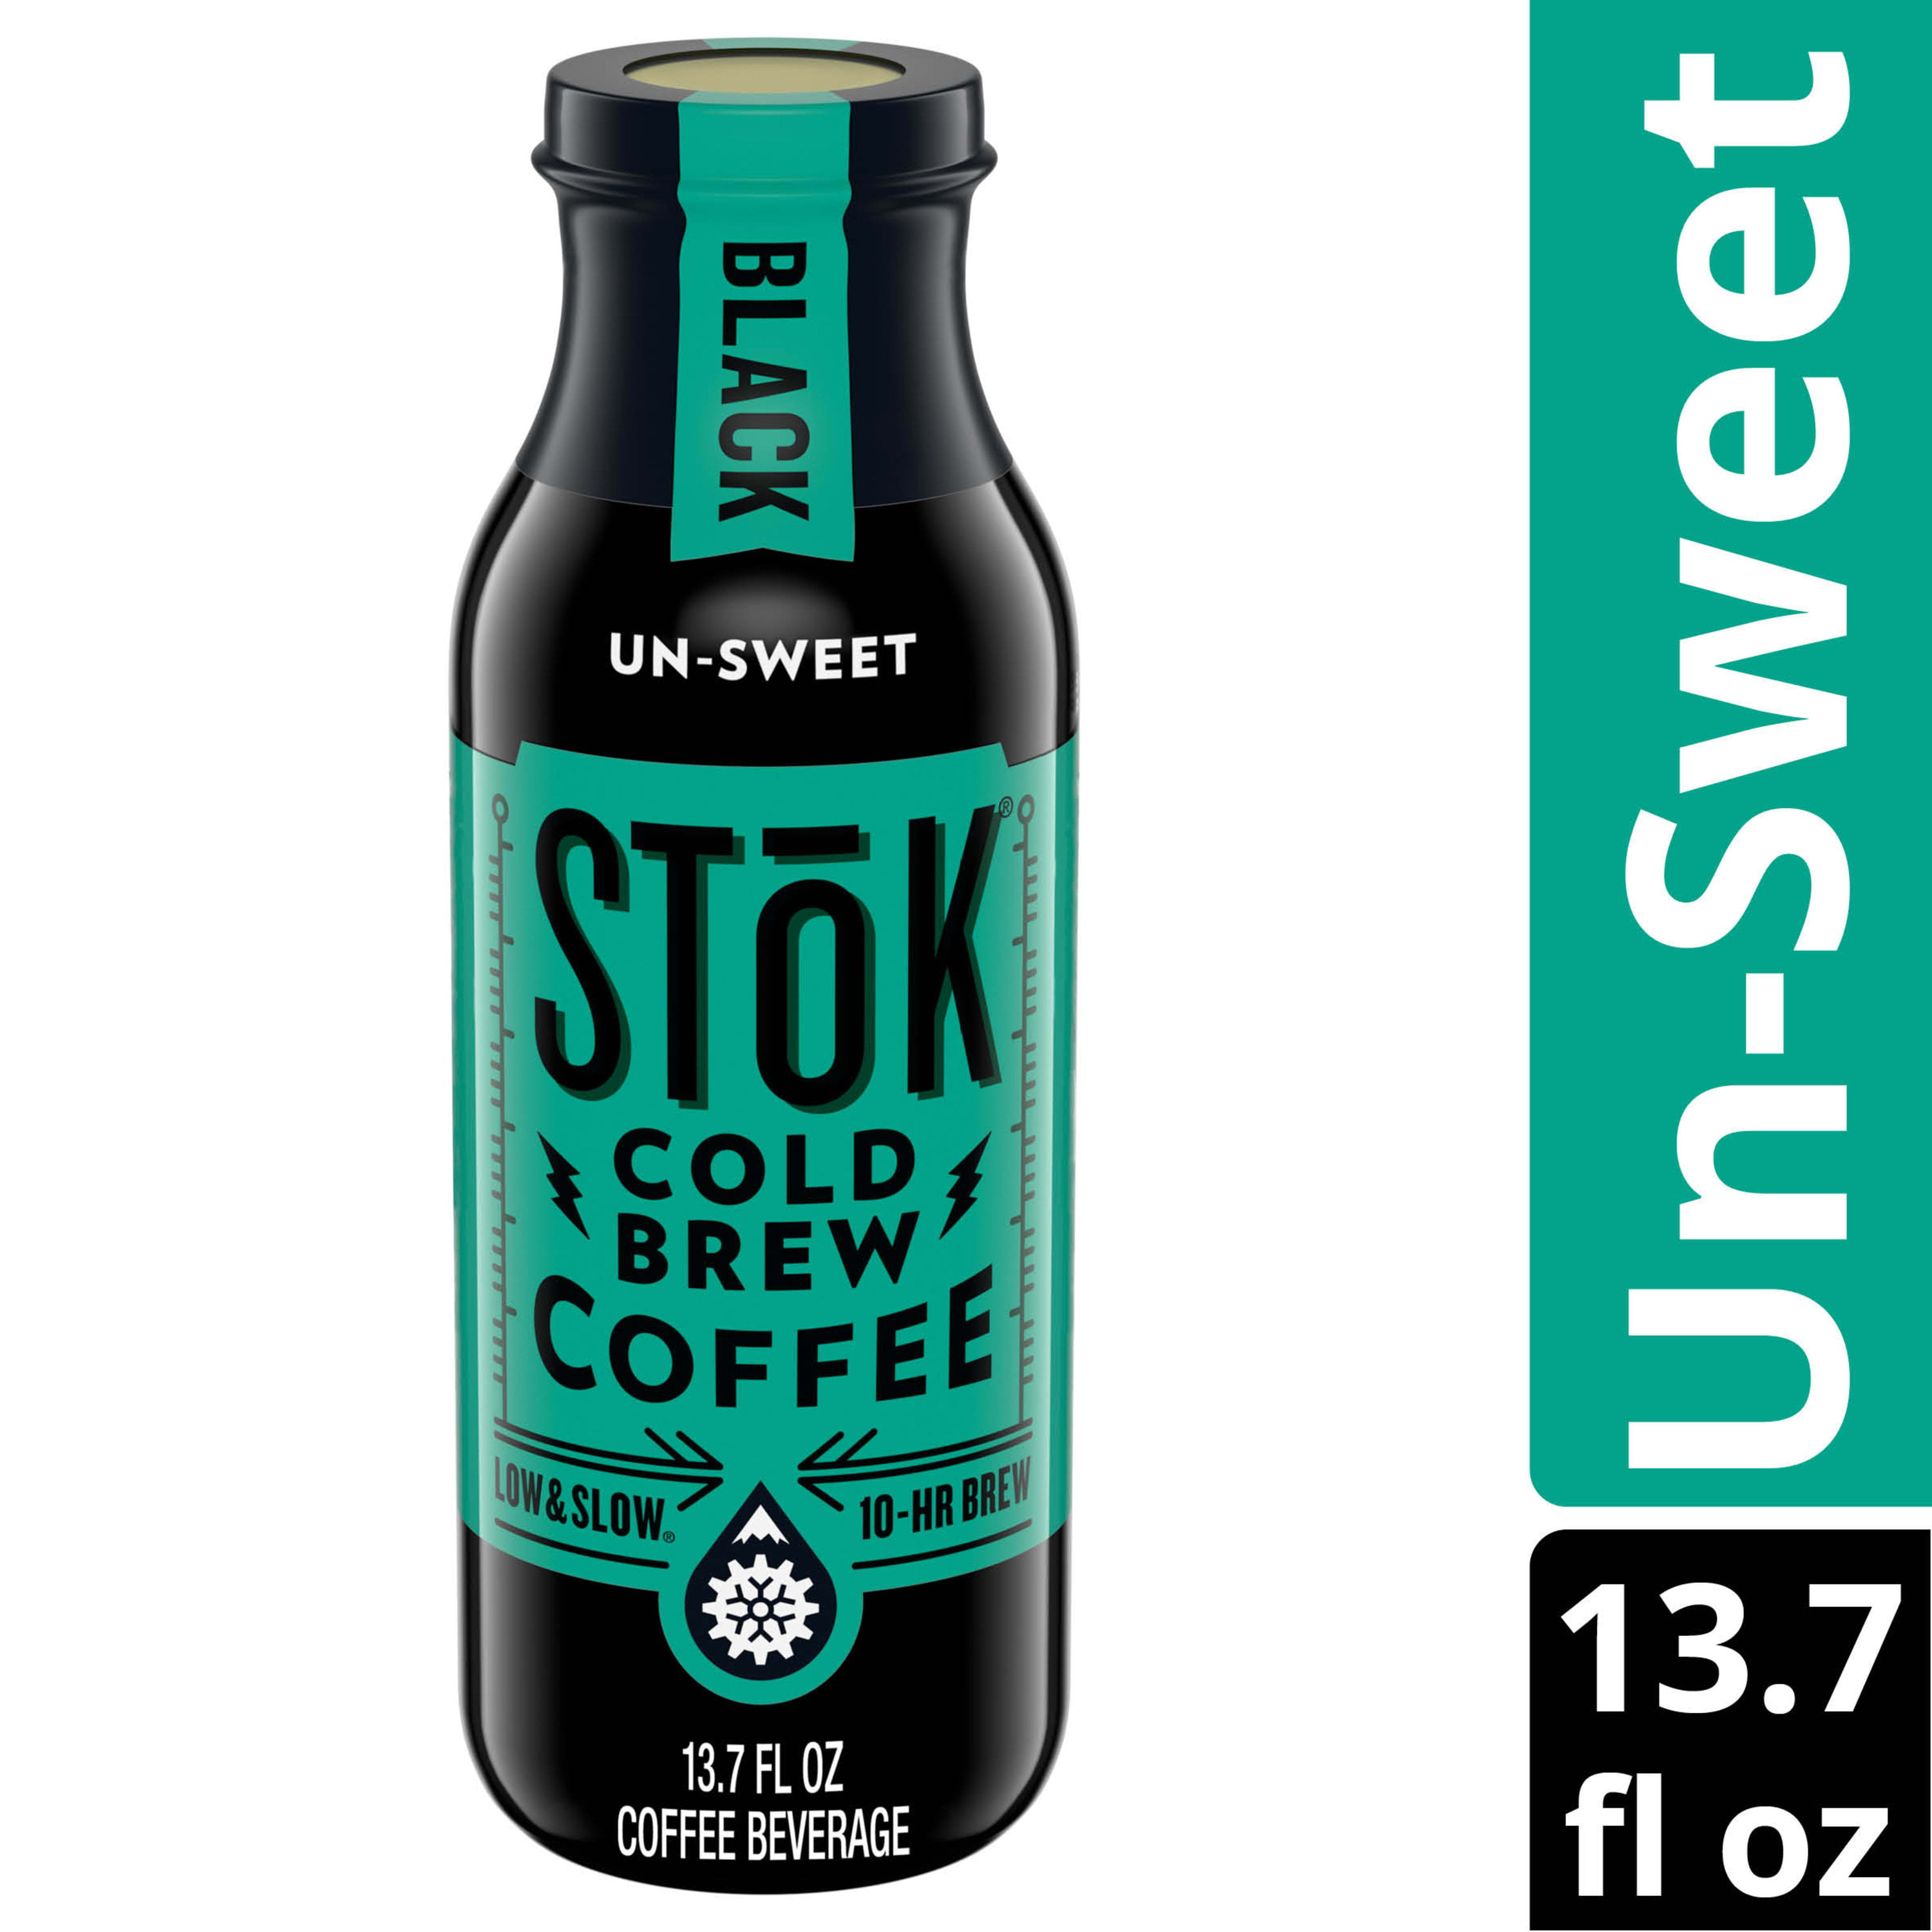 We Are Stok - STōK Cold Brew Coffee